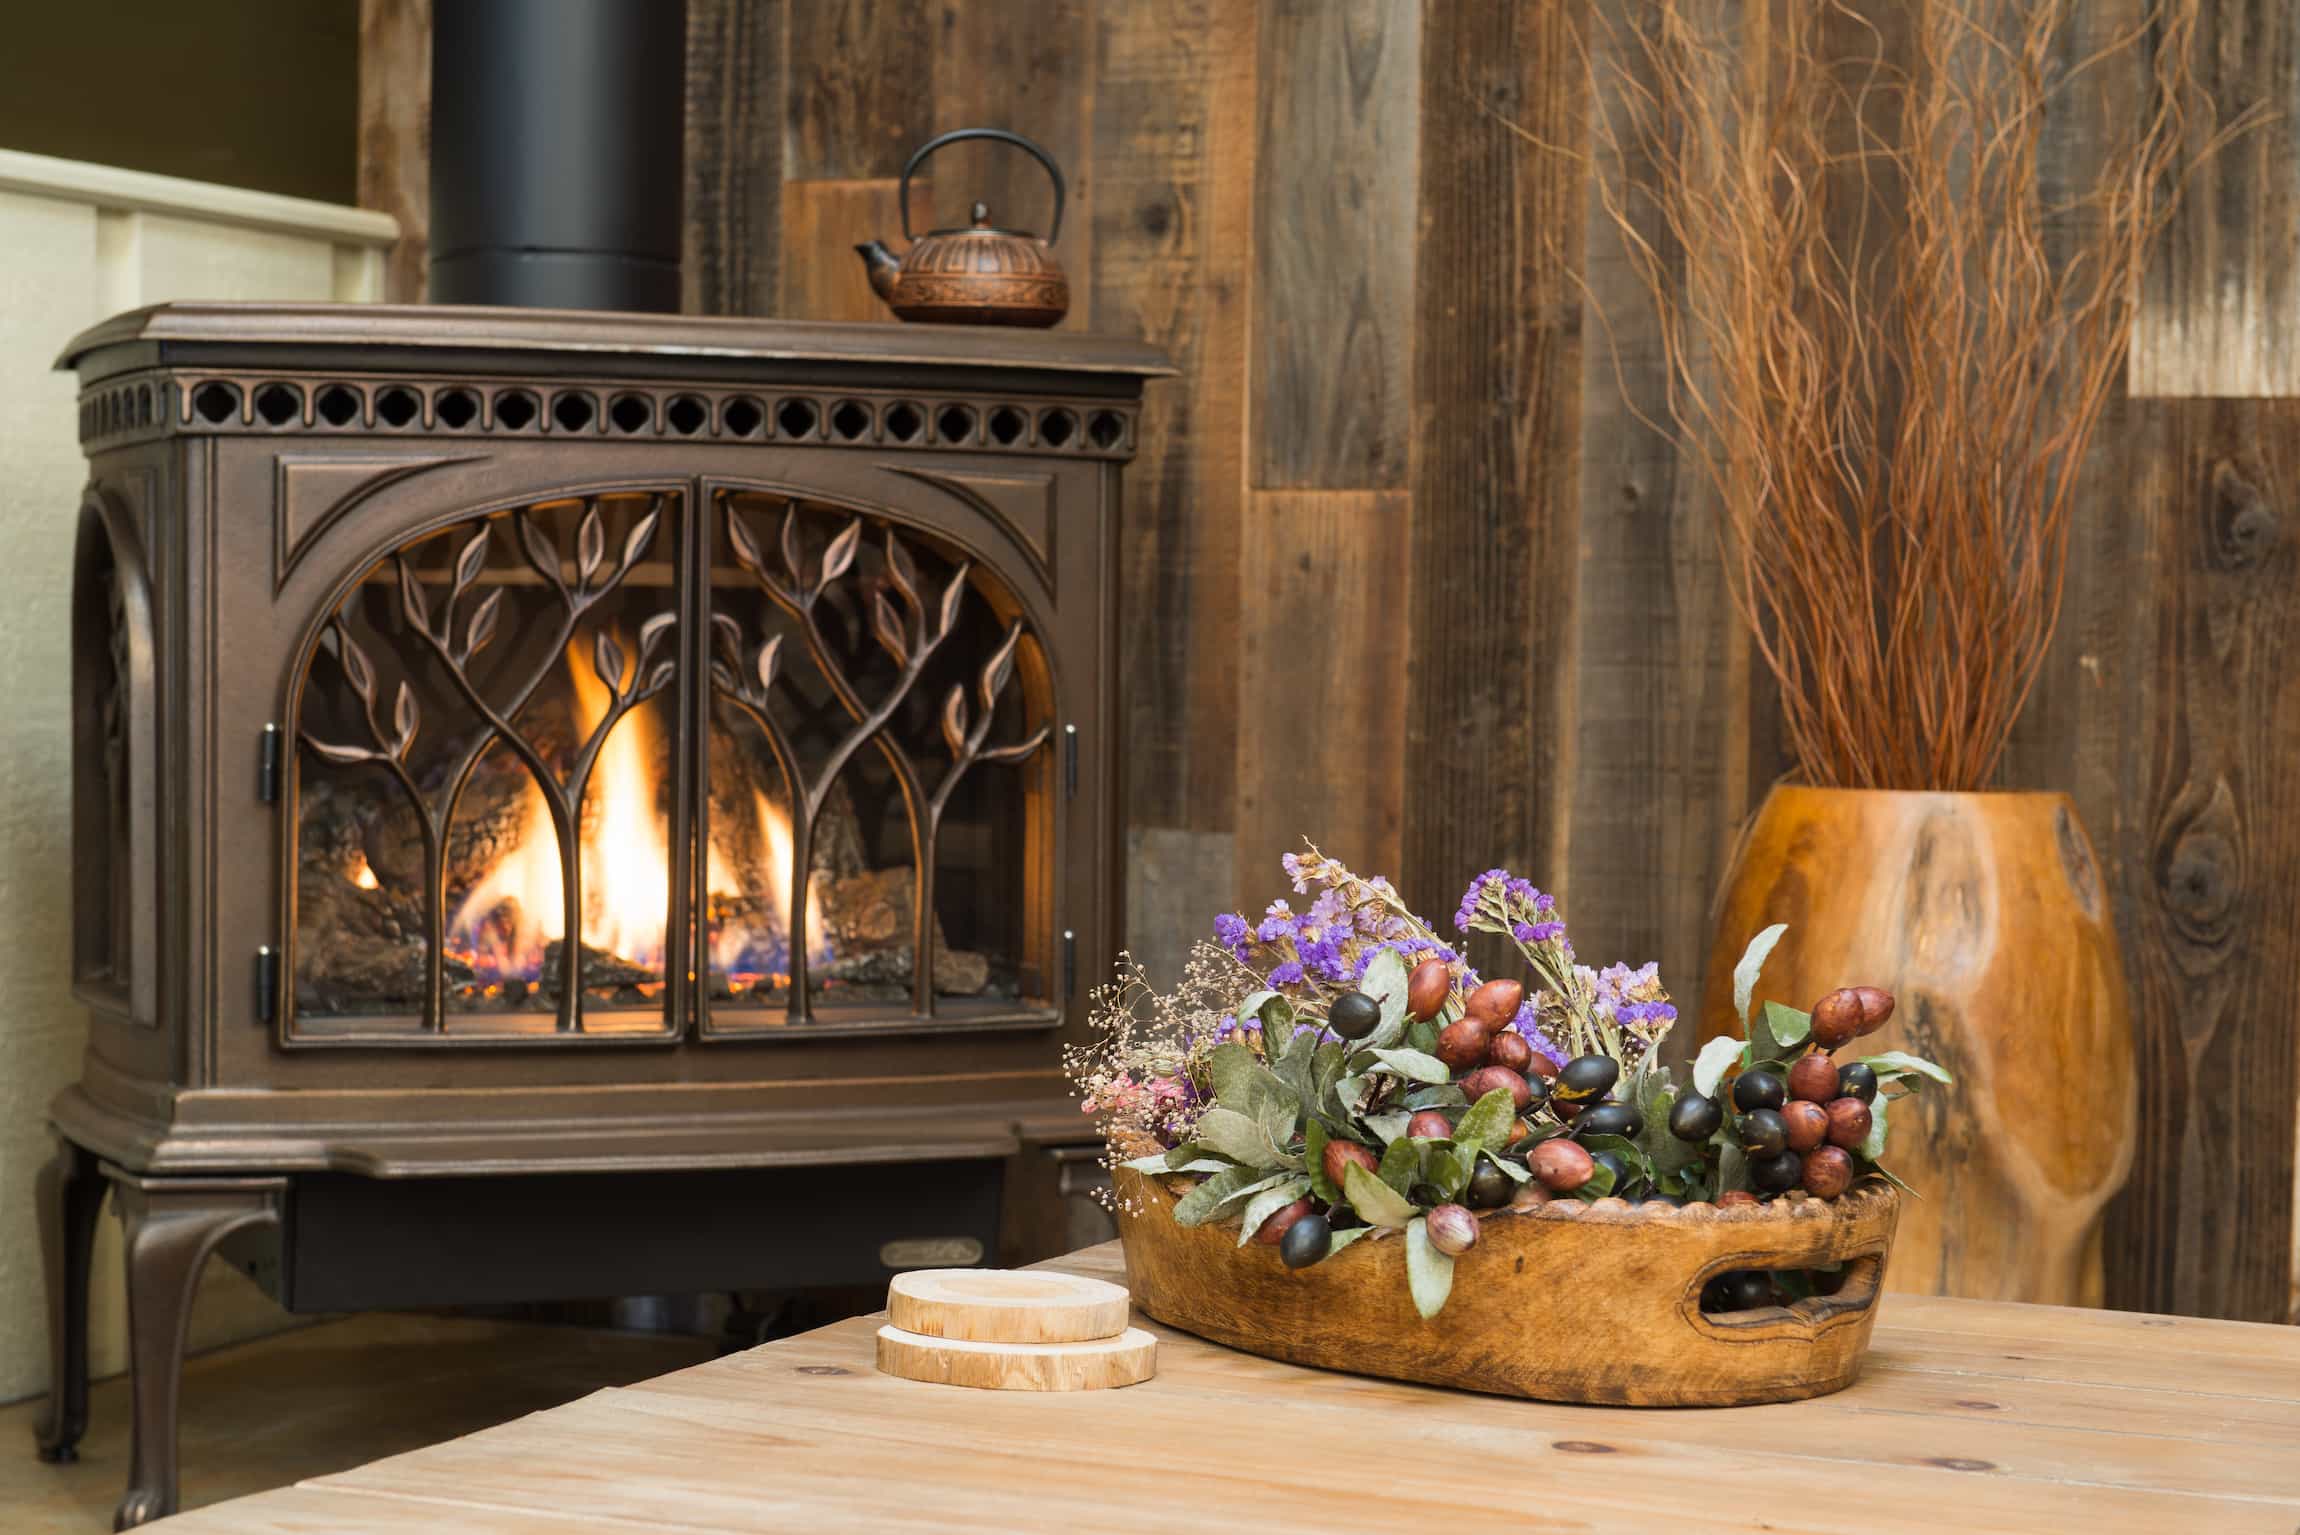 A fireplace warms the Creekside Suite at Country Willows Inn and Estate in Ashland, Oregon.